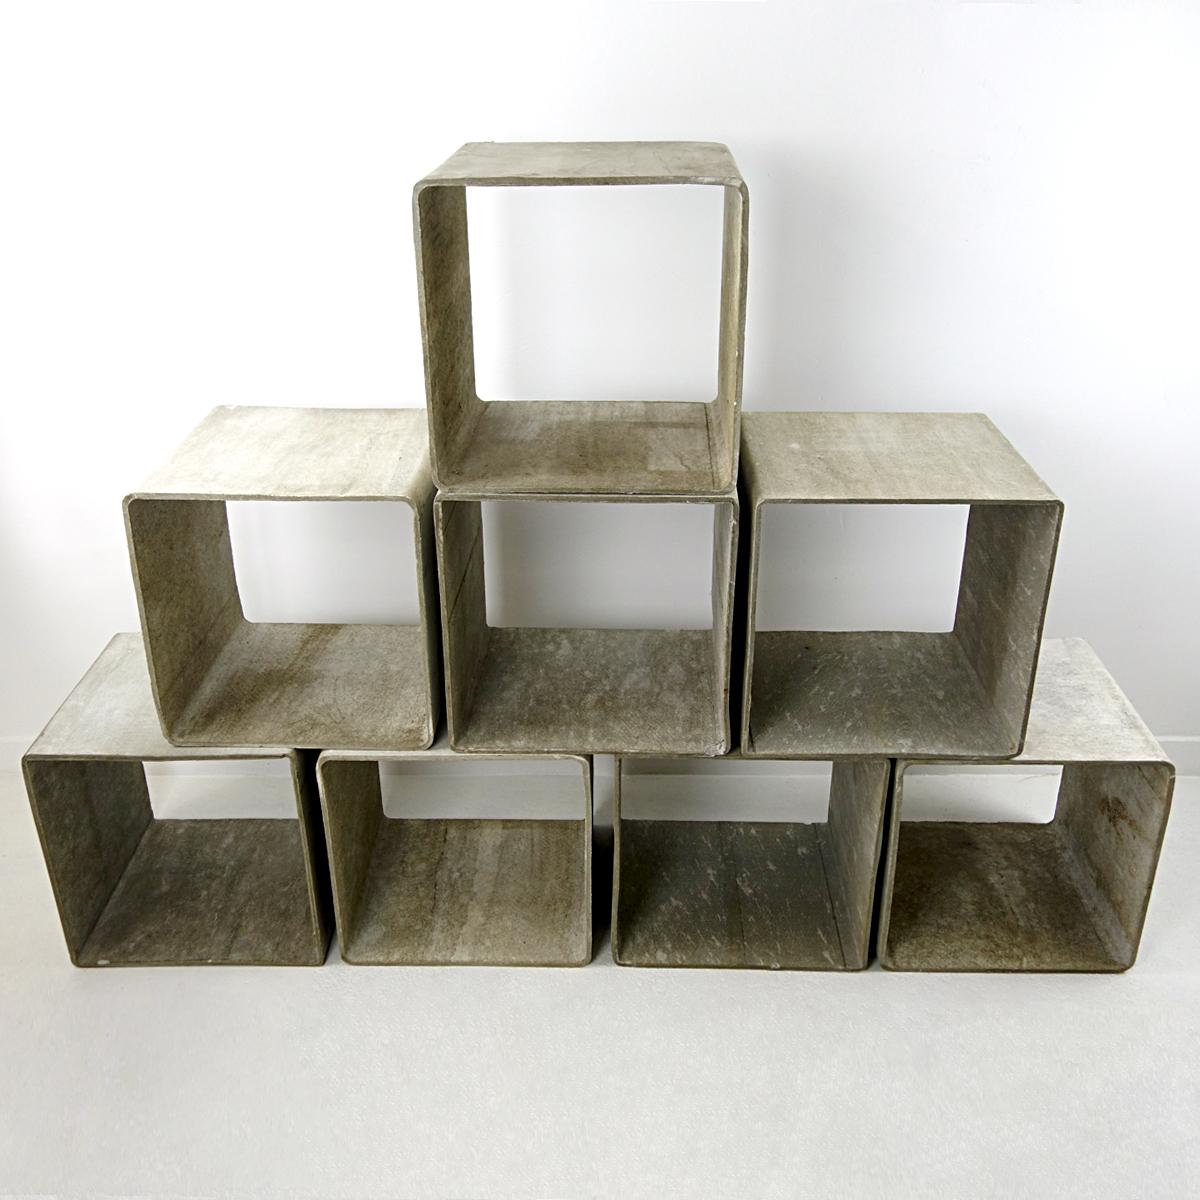 The Swiss designer Willy Guhl is mostly known for his famous planters but he designed other beautiful items as well, such as these marvelous cubes that may serve as bookcases or displays for your collection of ceramics for instance. 
This set of